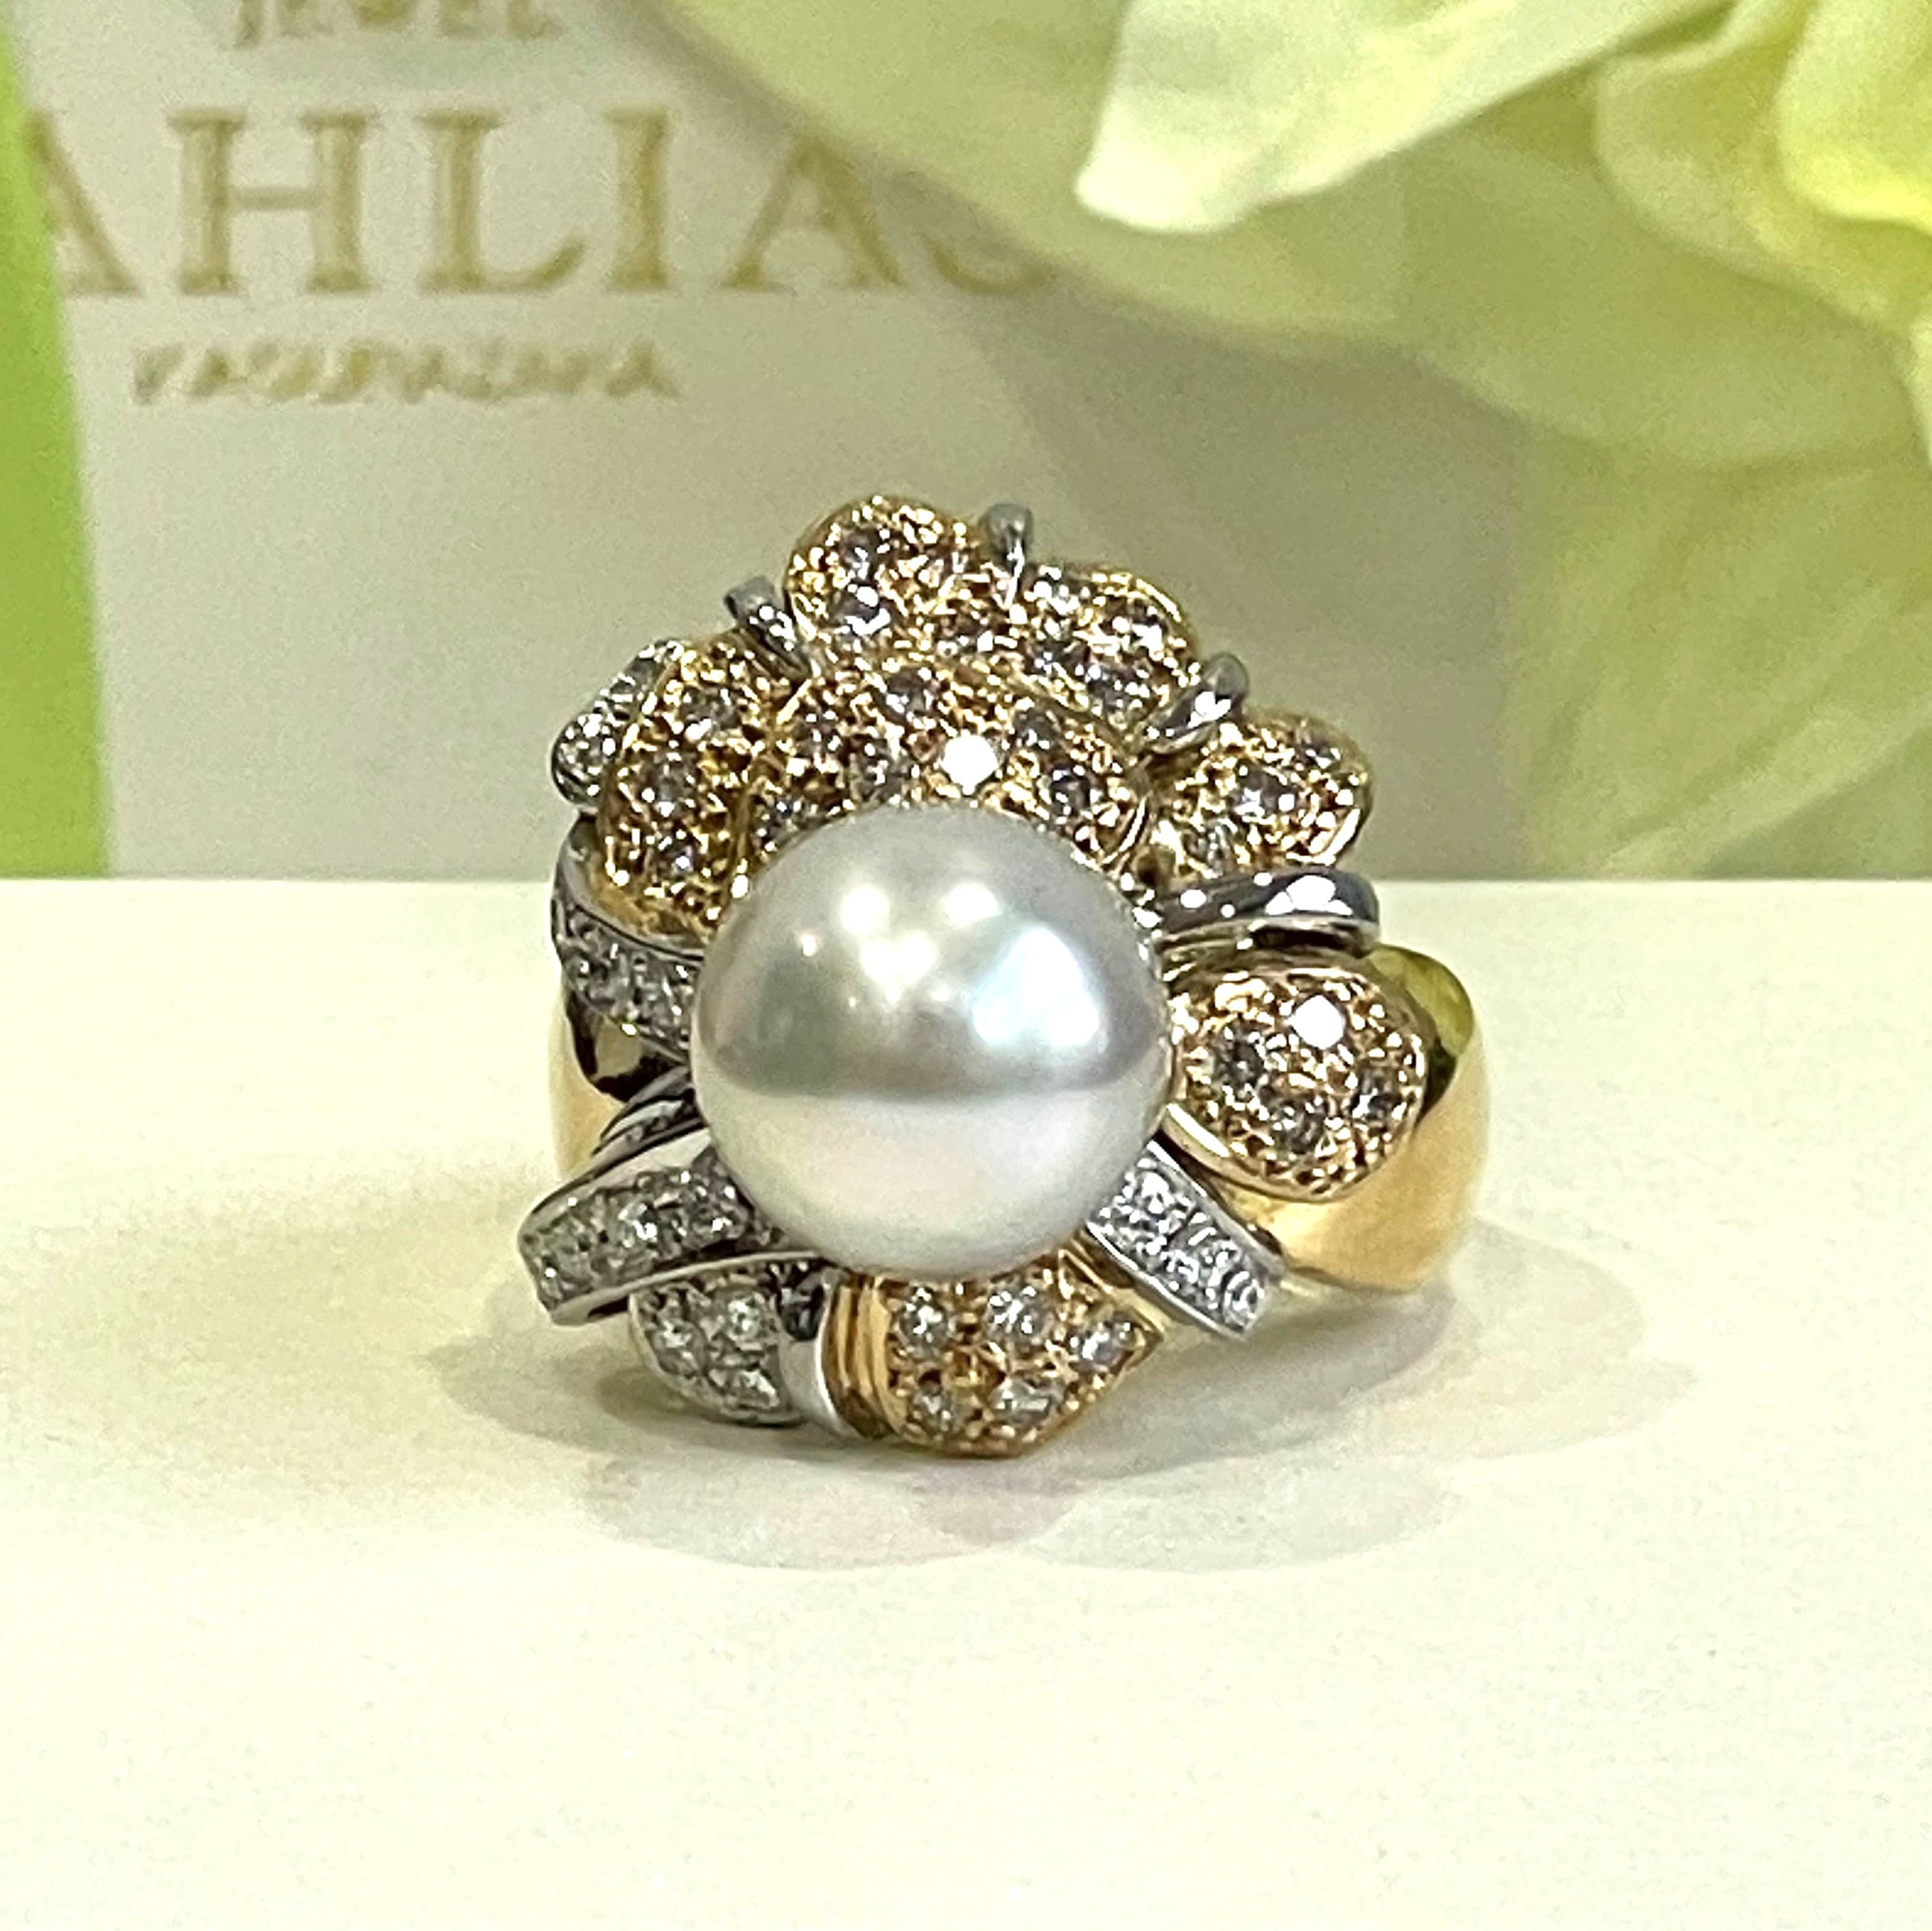 [one of a kind] K18 Platinum900 South Sea pearl Natural diamond  pearl 12mm  diamond 0.97ct size : JCS 17 US 8.5(adjustable)  weight : 22g